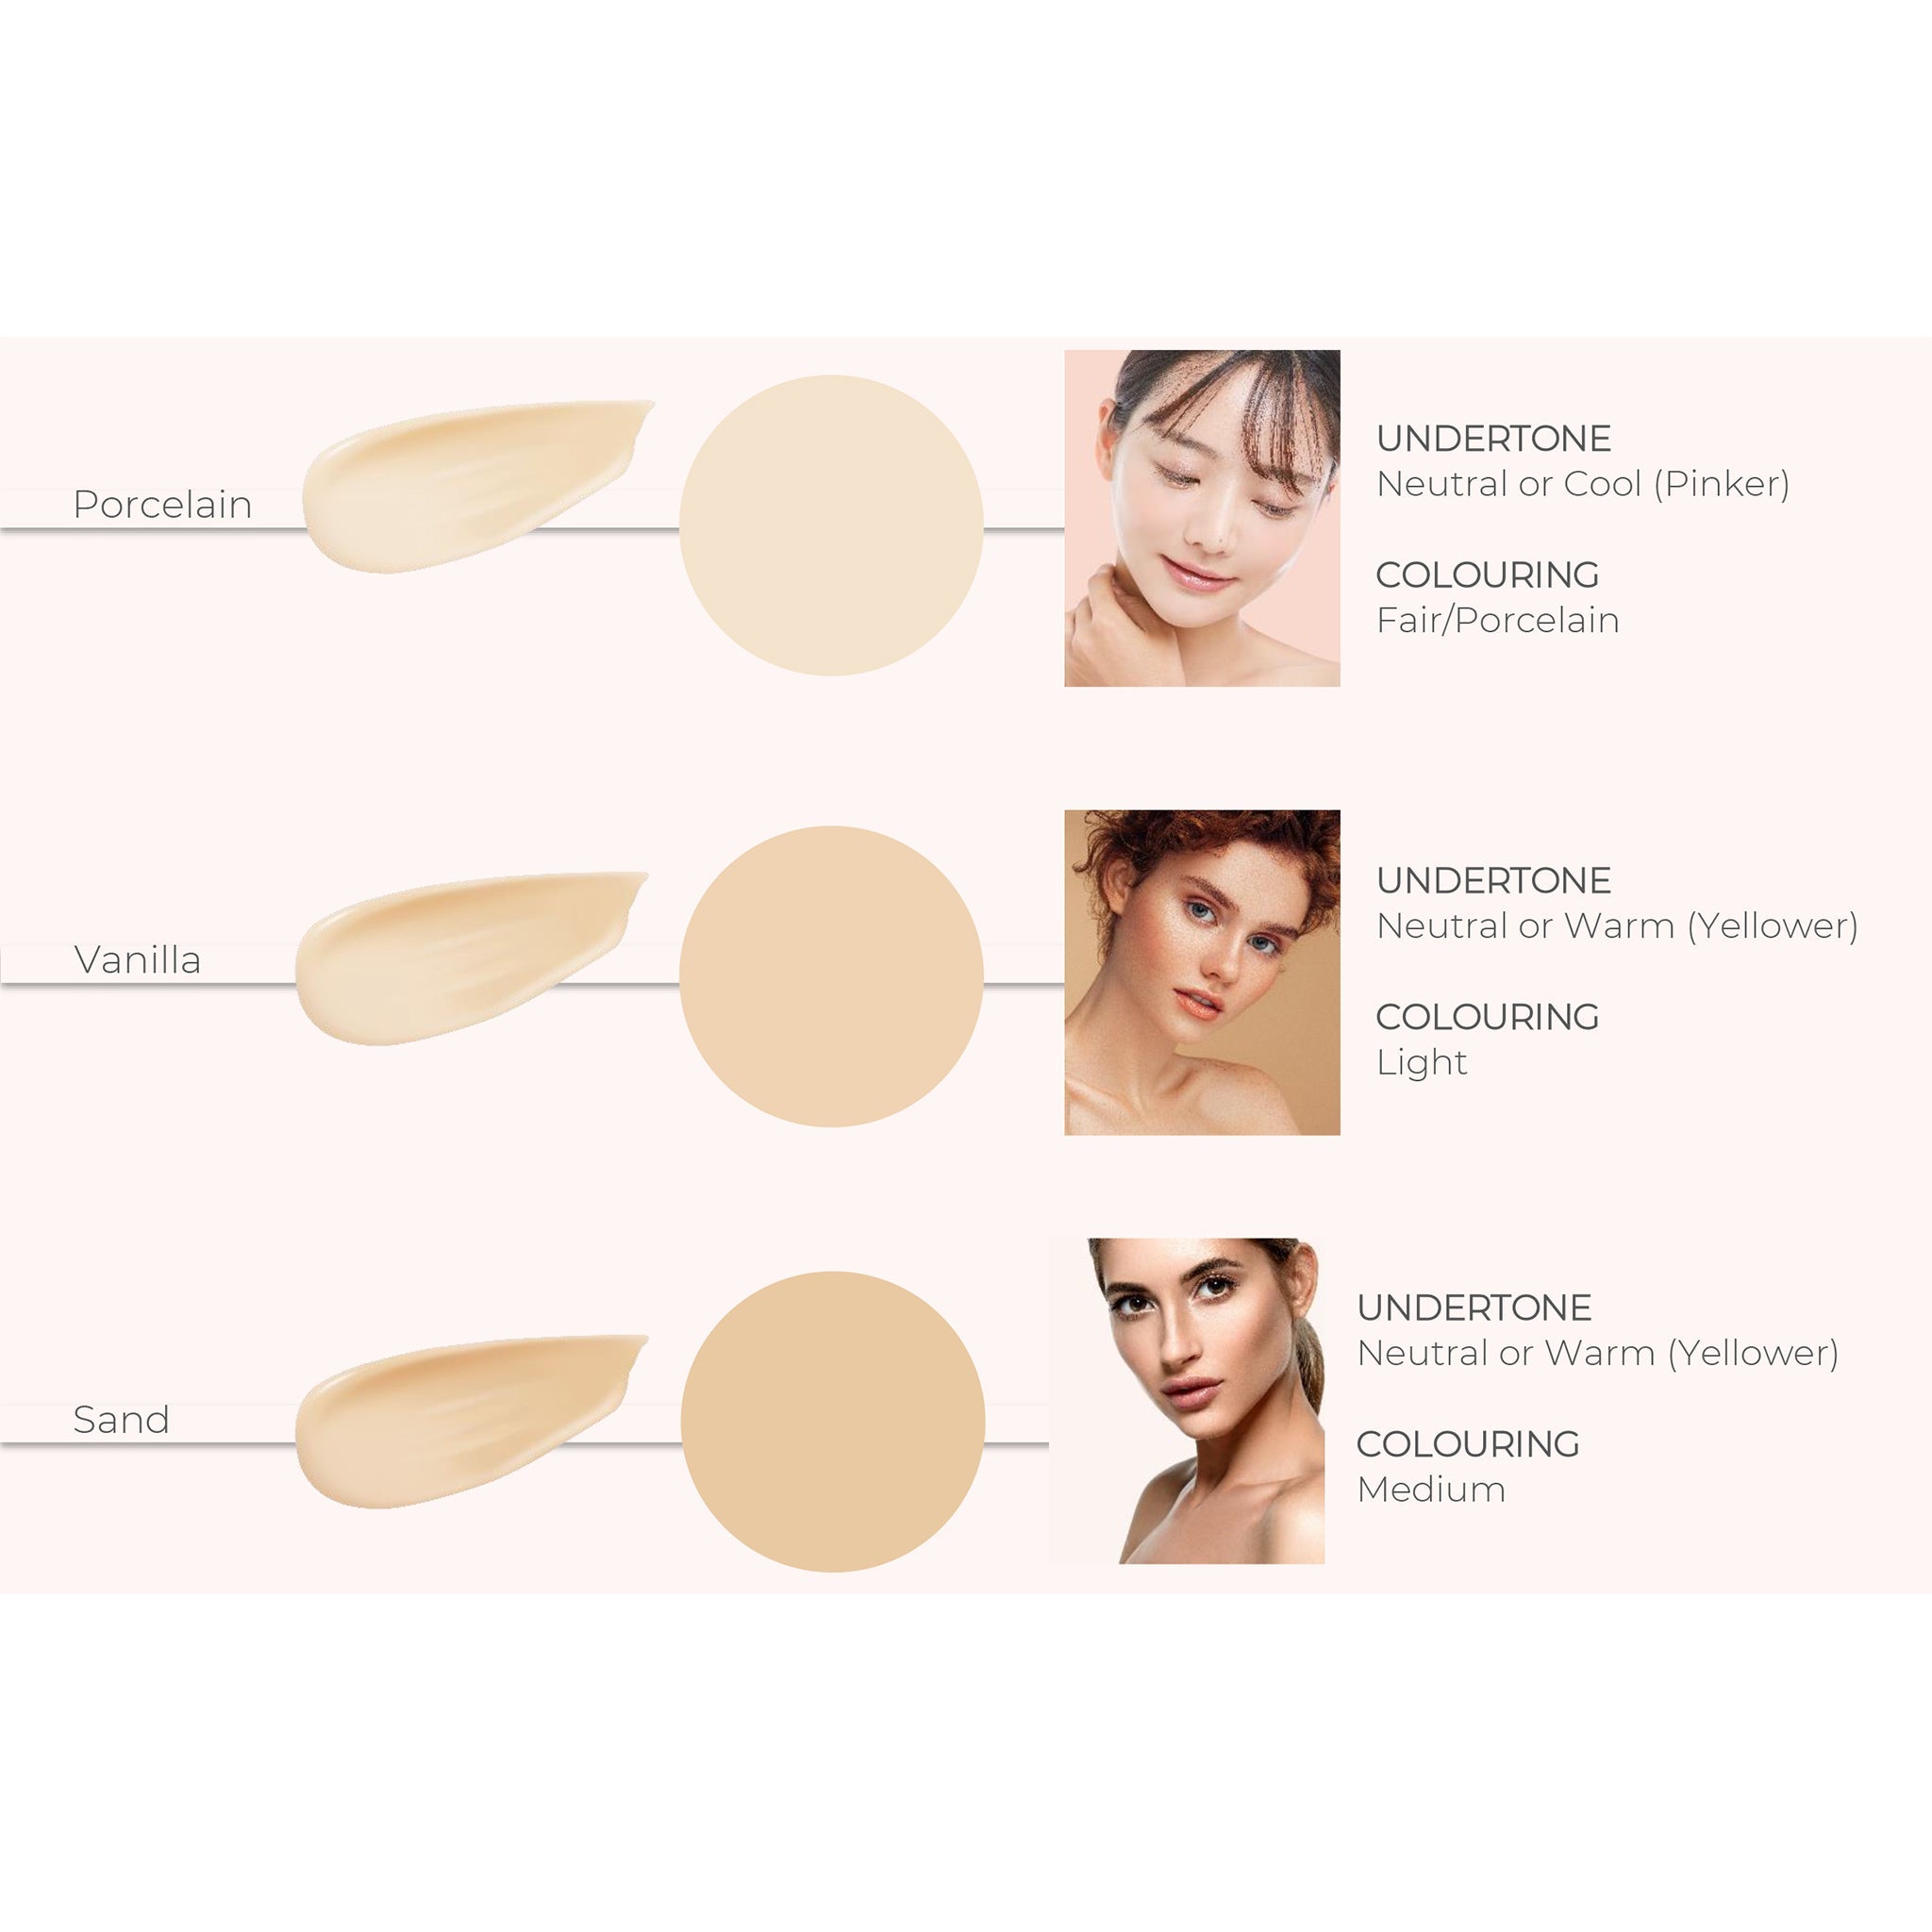 NEW Sheer Coverage Concealer - mypure.co.uk